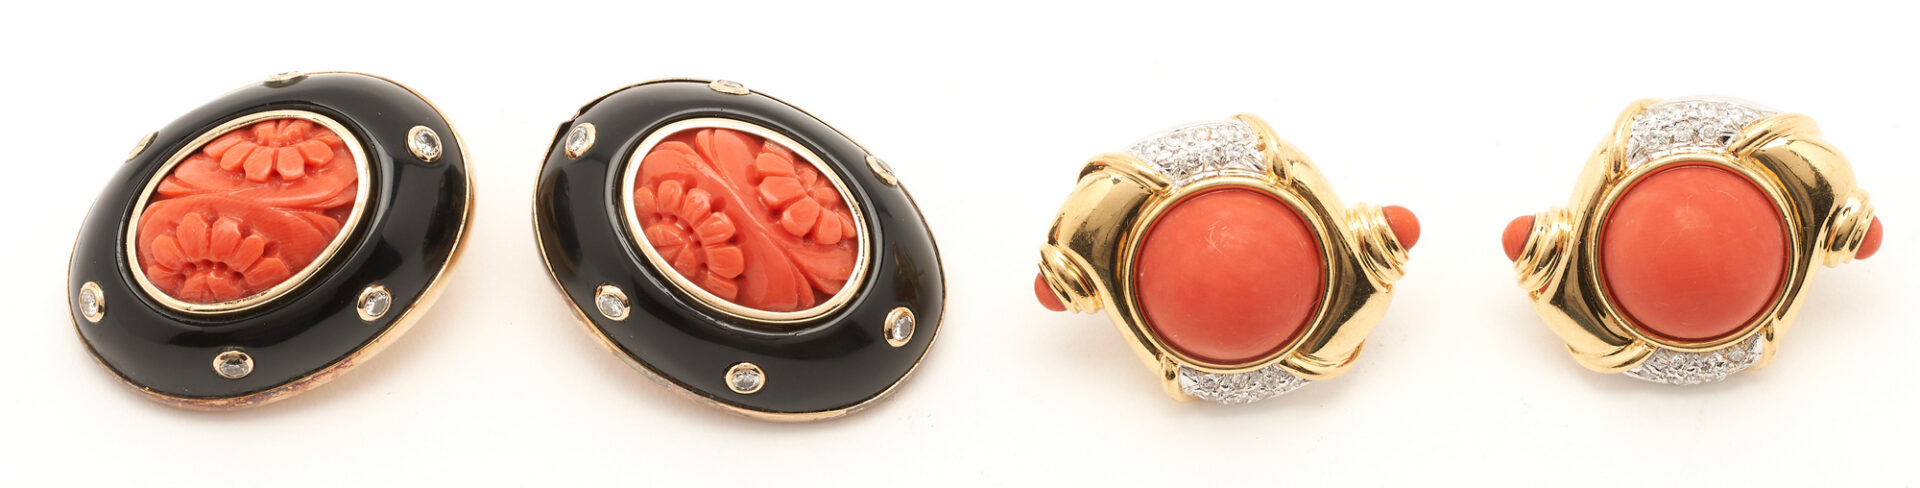 Lot 61: 2 Pairs of Gold, Coral, & Diamond Earrings